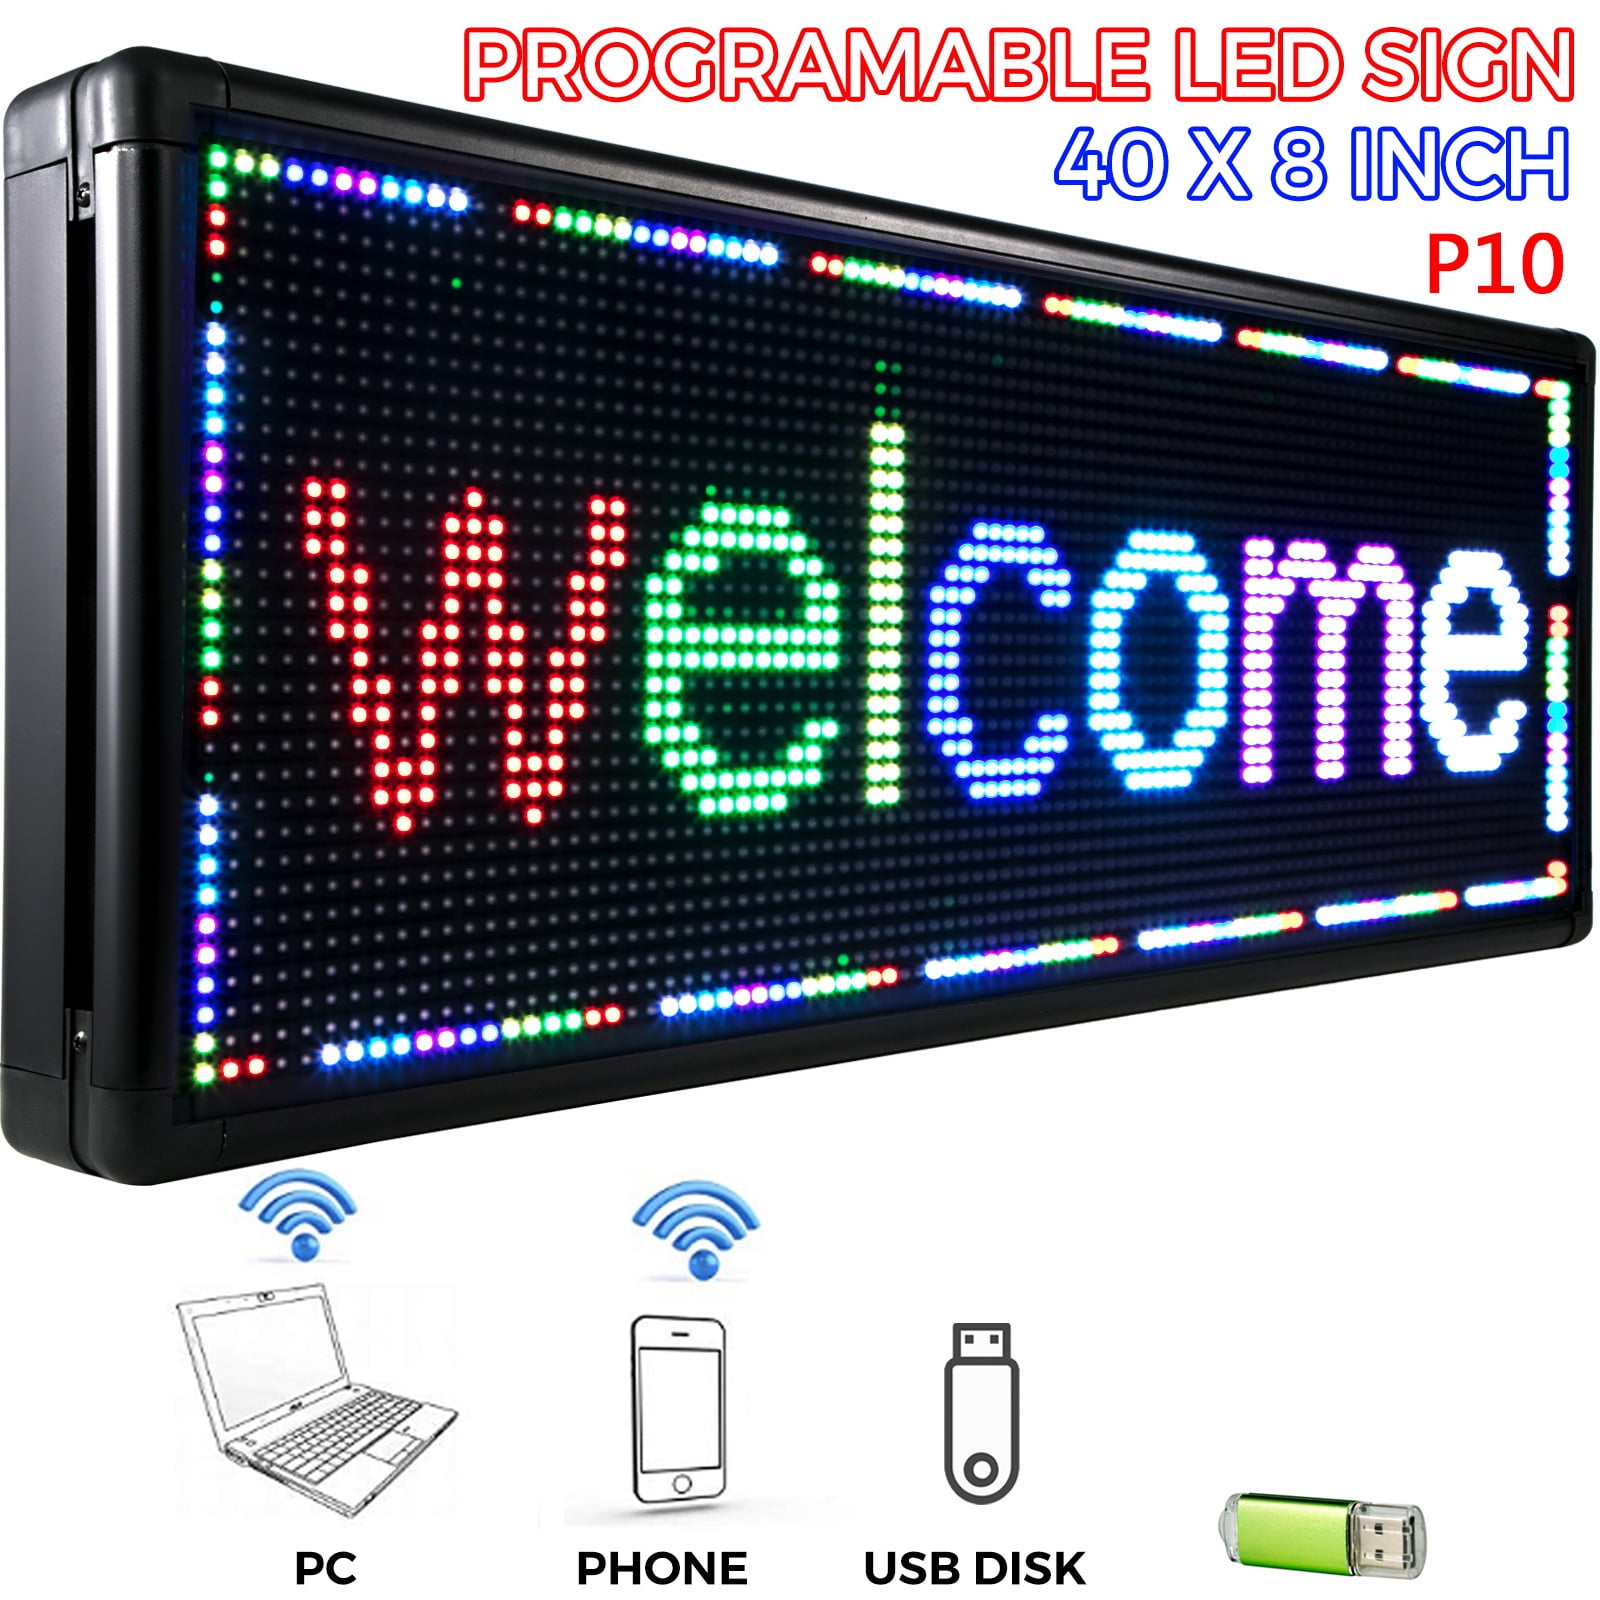 38"x 8" P6 Semi Outdoor Full Color LED Sign Programmable Scrolling Message Board 